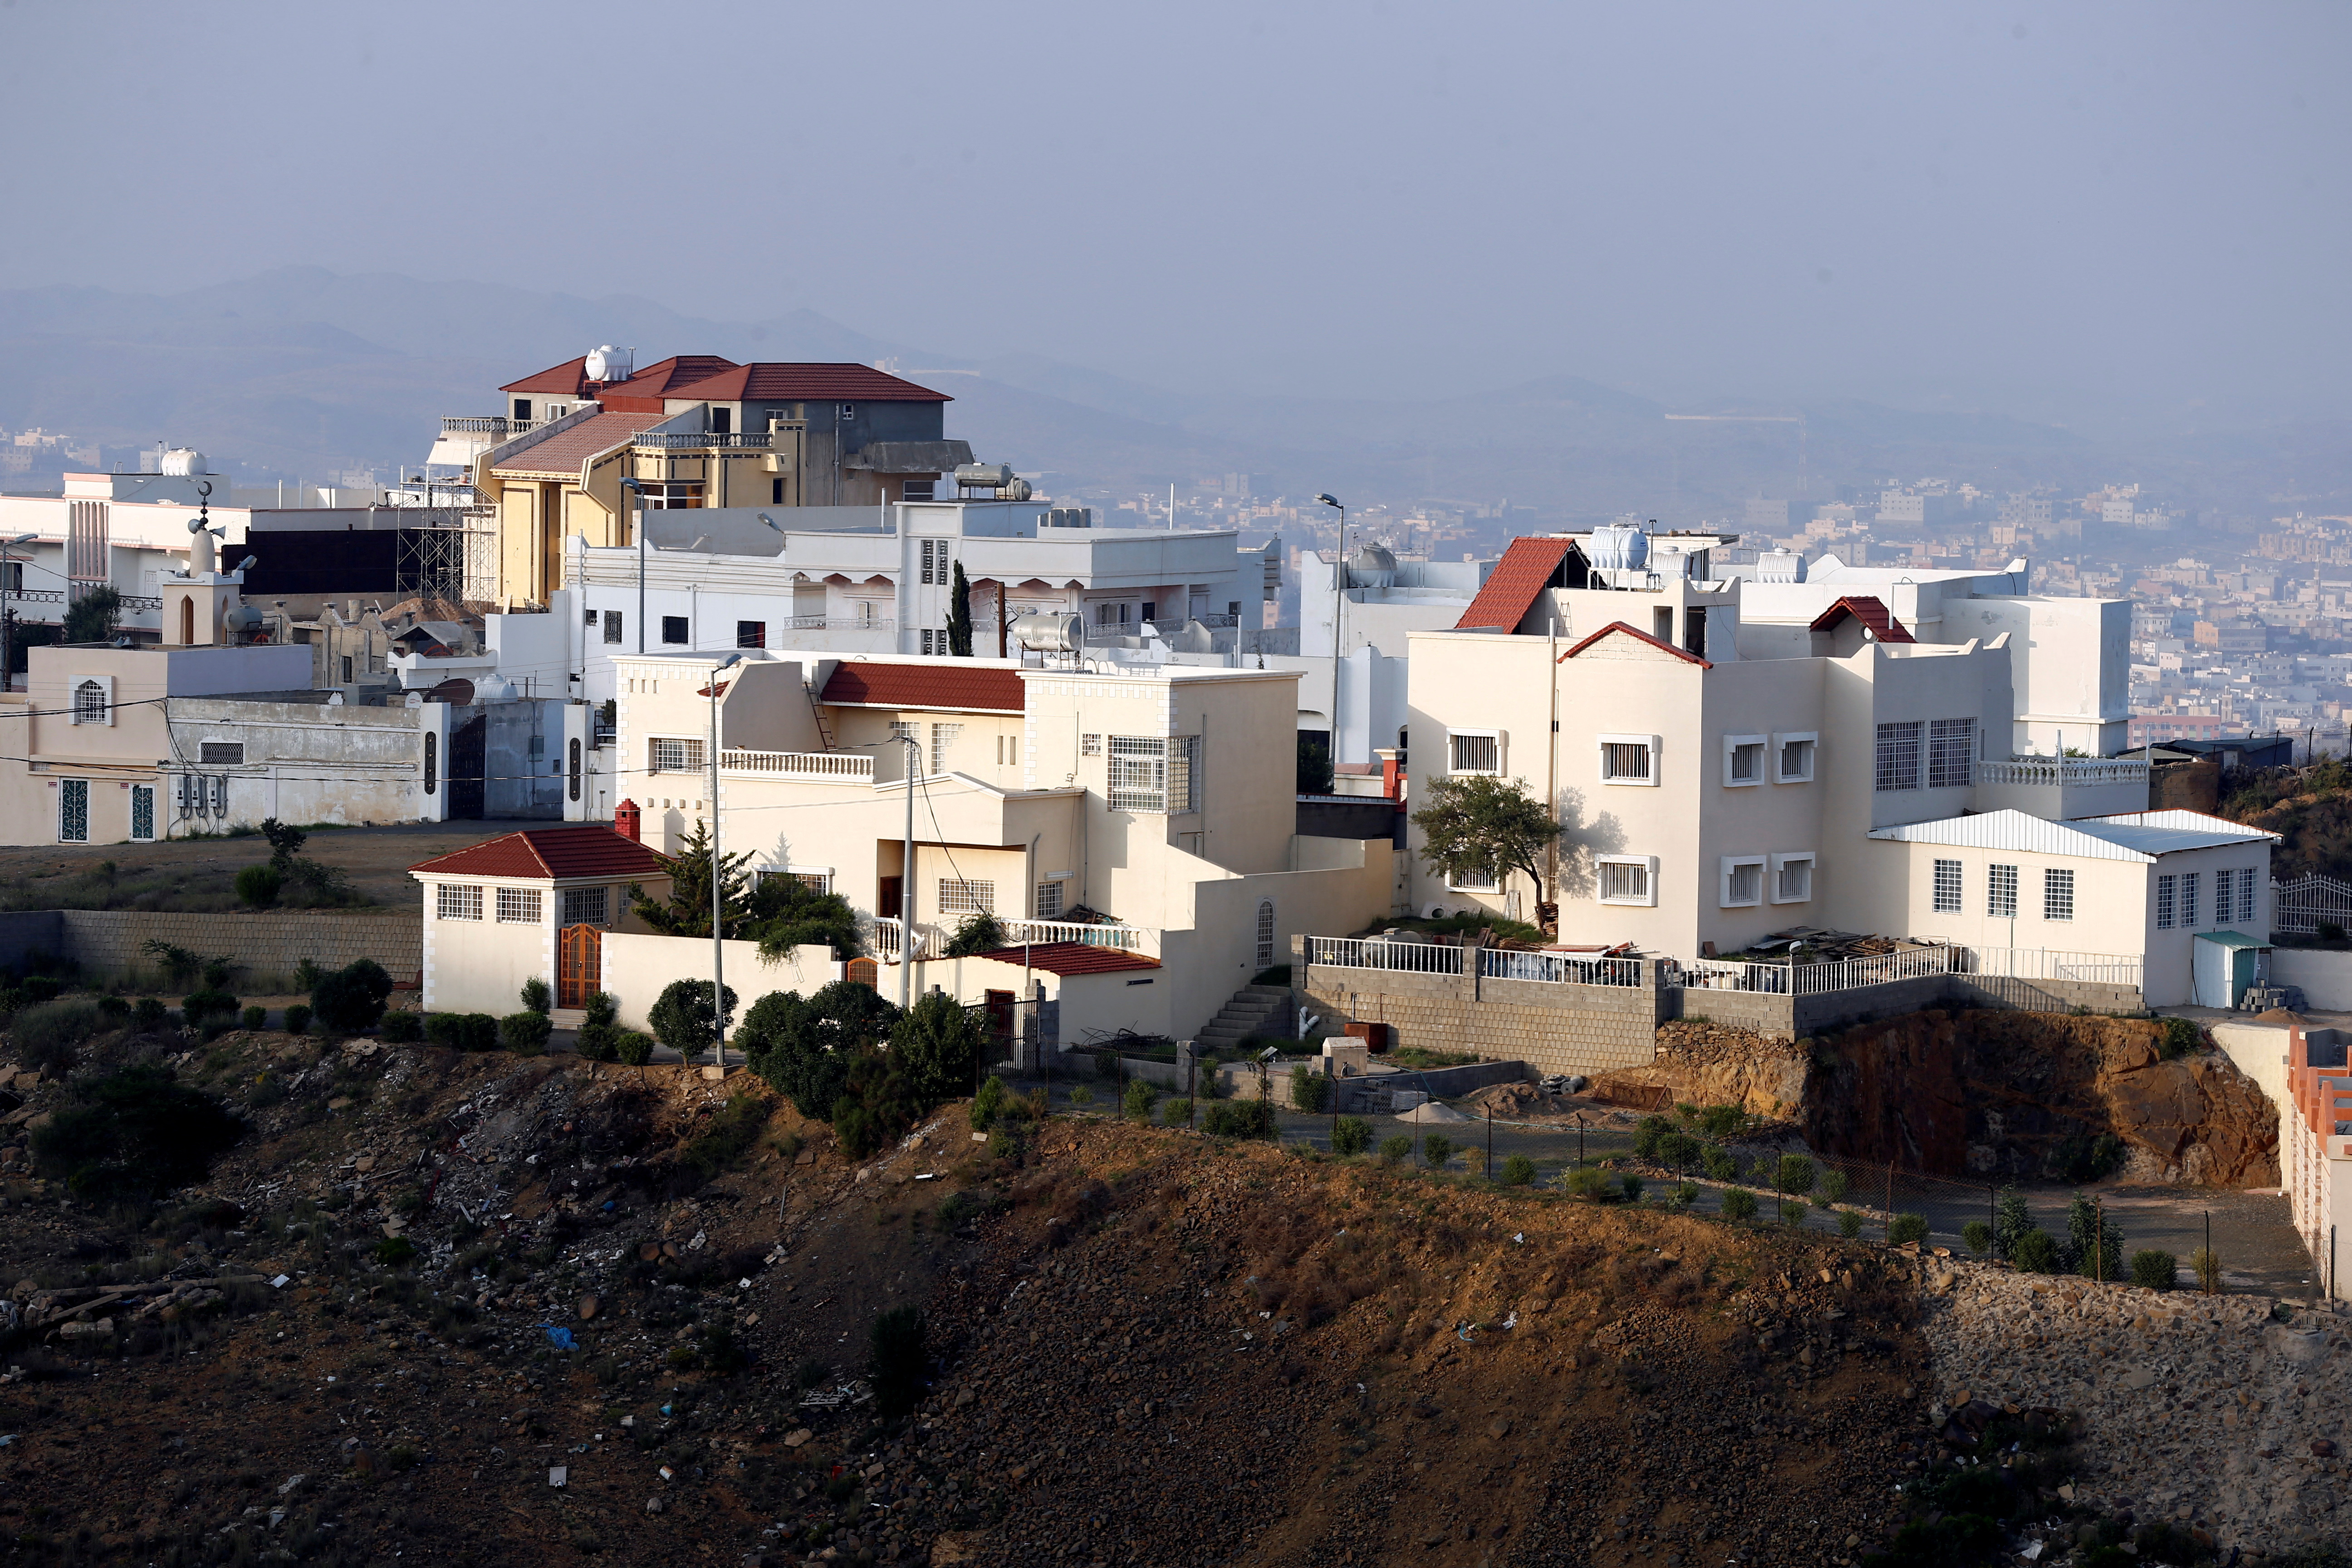 View of houses and buildings in Abha